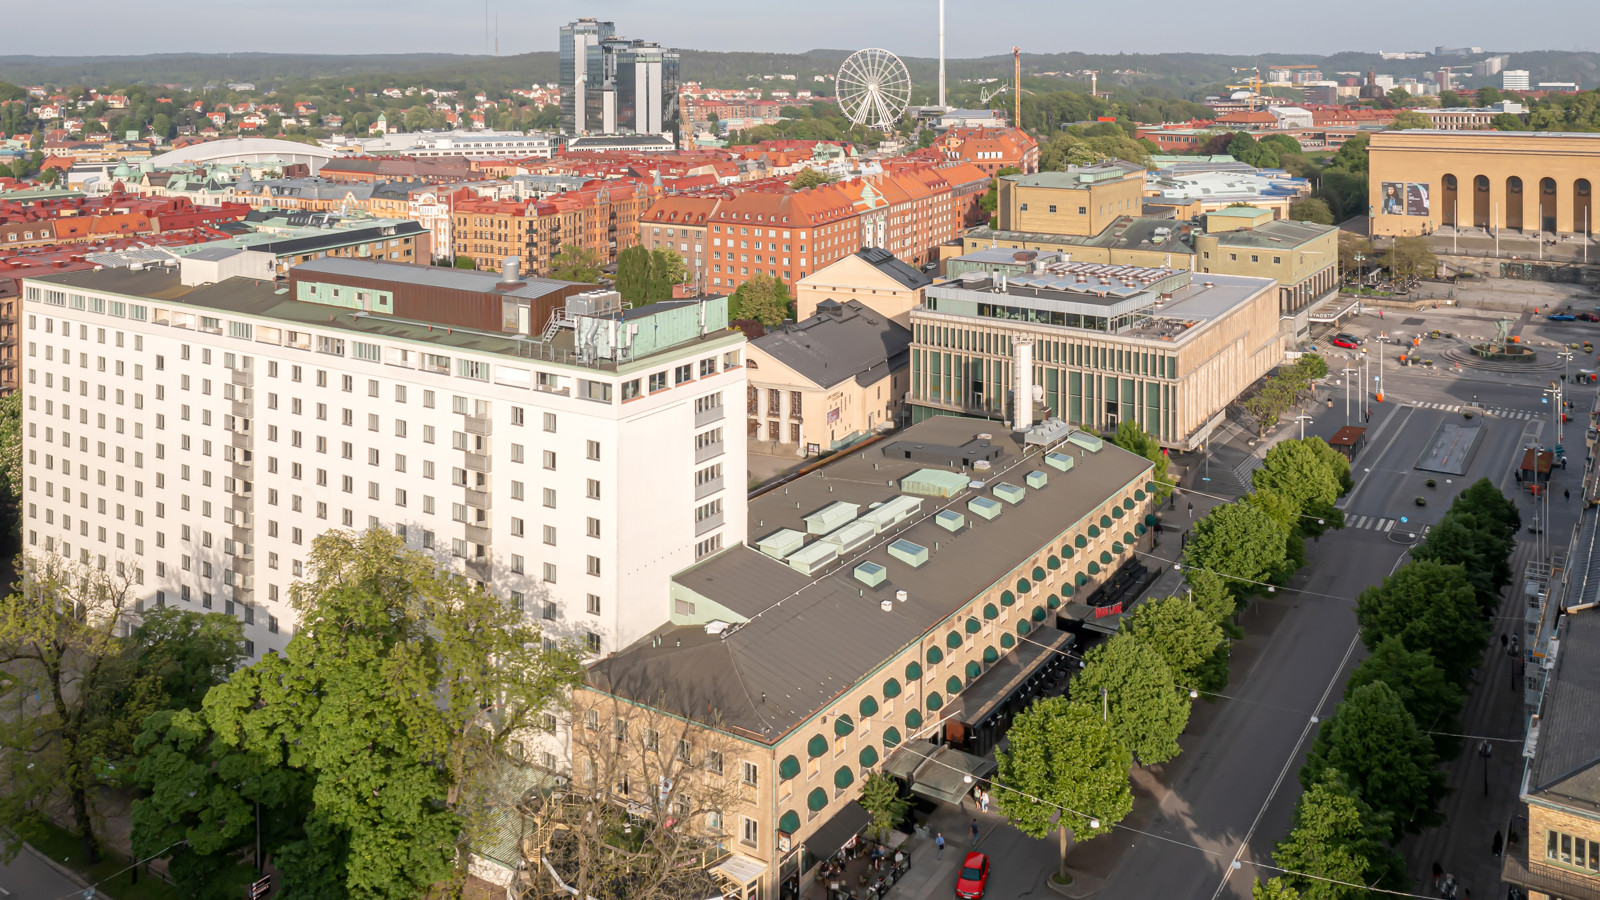 Drone image of the Elite Park Avenue Hotel in Gothenburg with Liseberg in the background